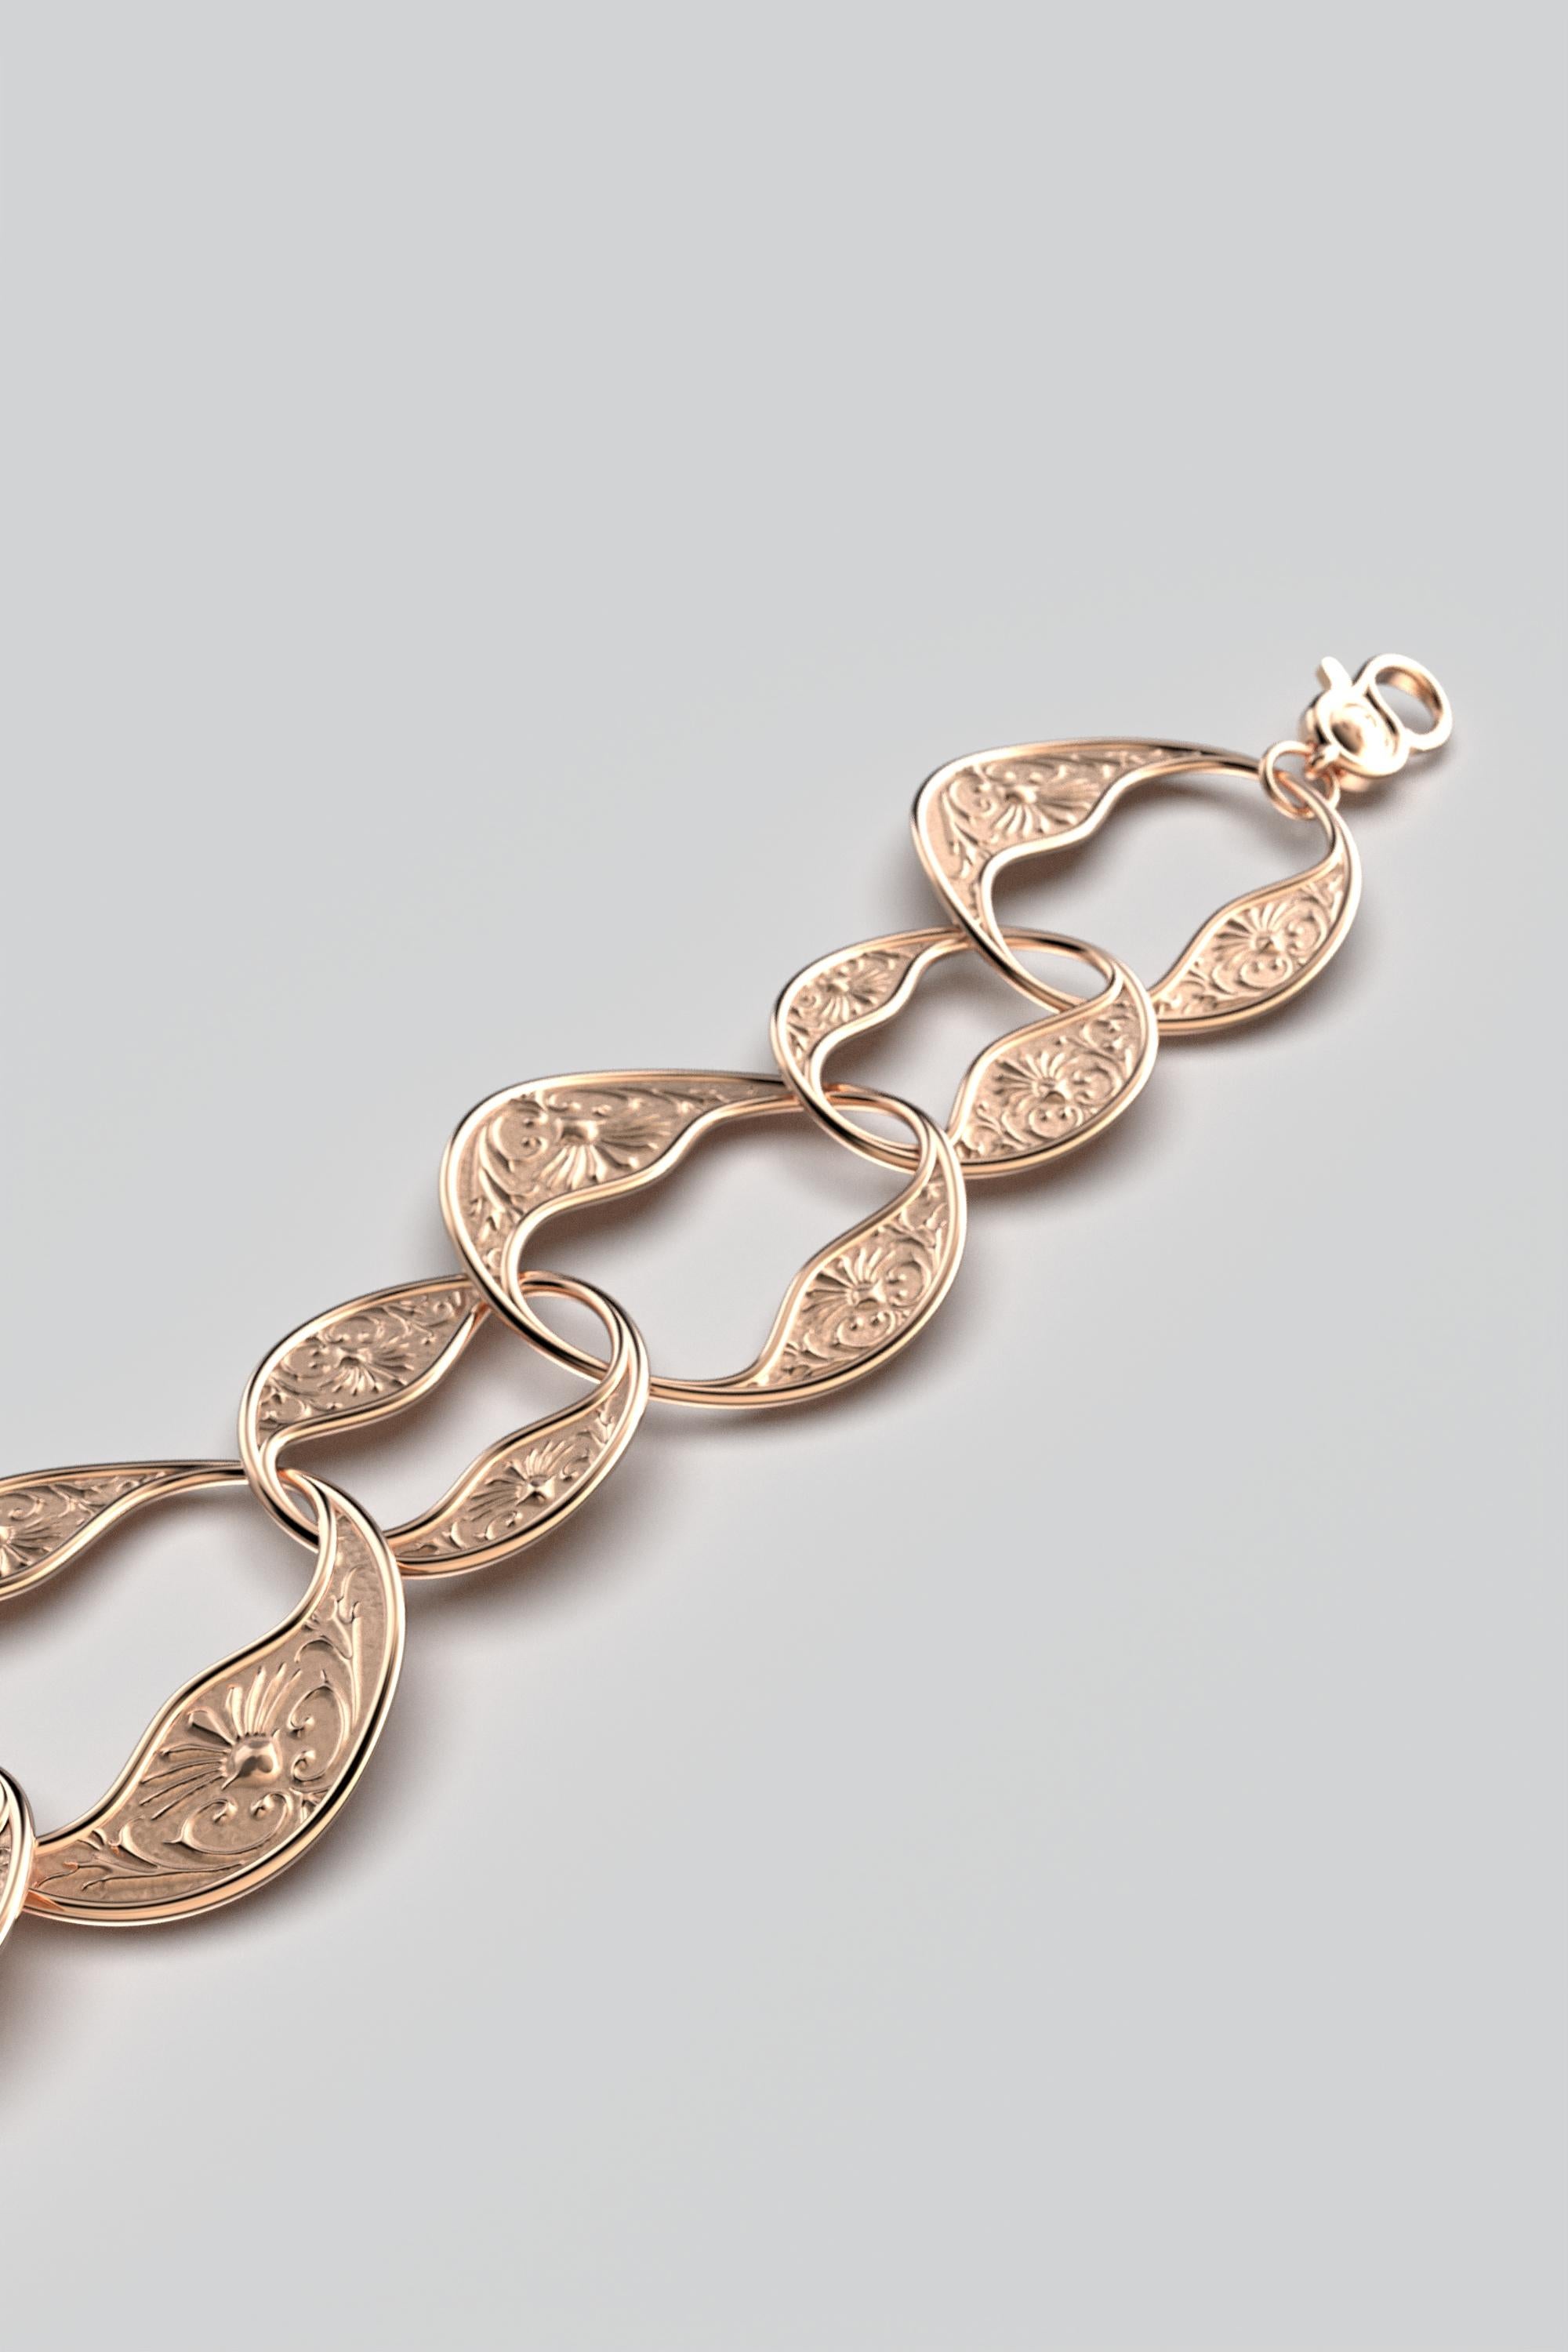 18k Gold Link Bracelet in Baroque Style | Made in Italy by Oltremare Gioielli For Sale 2